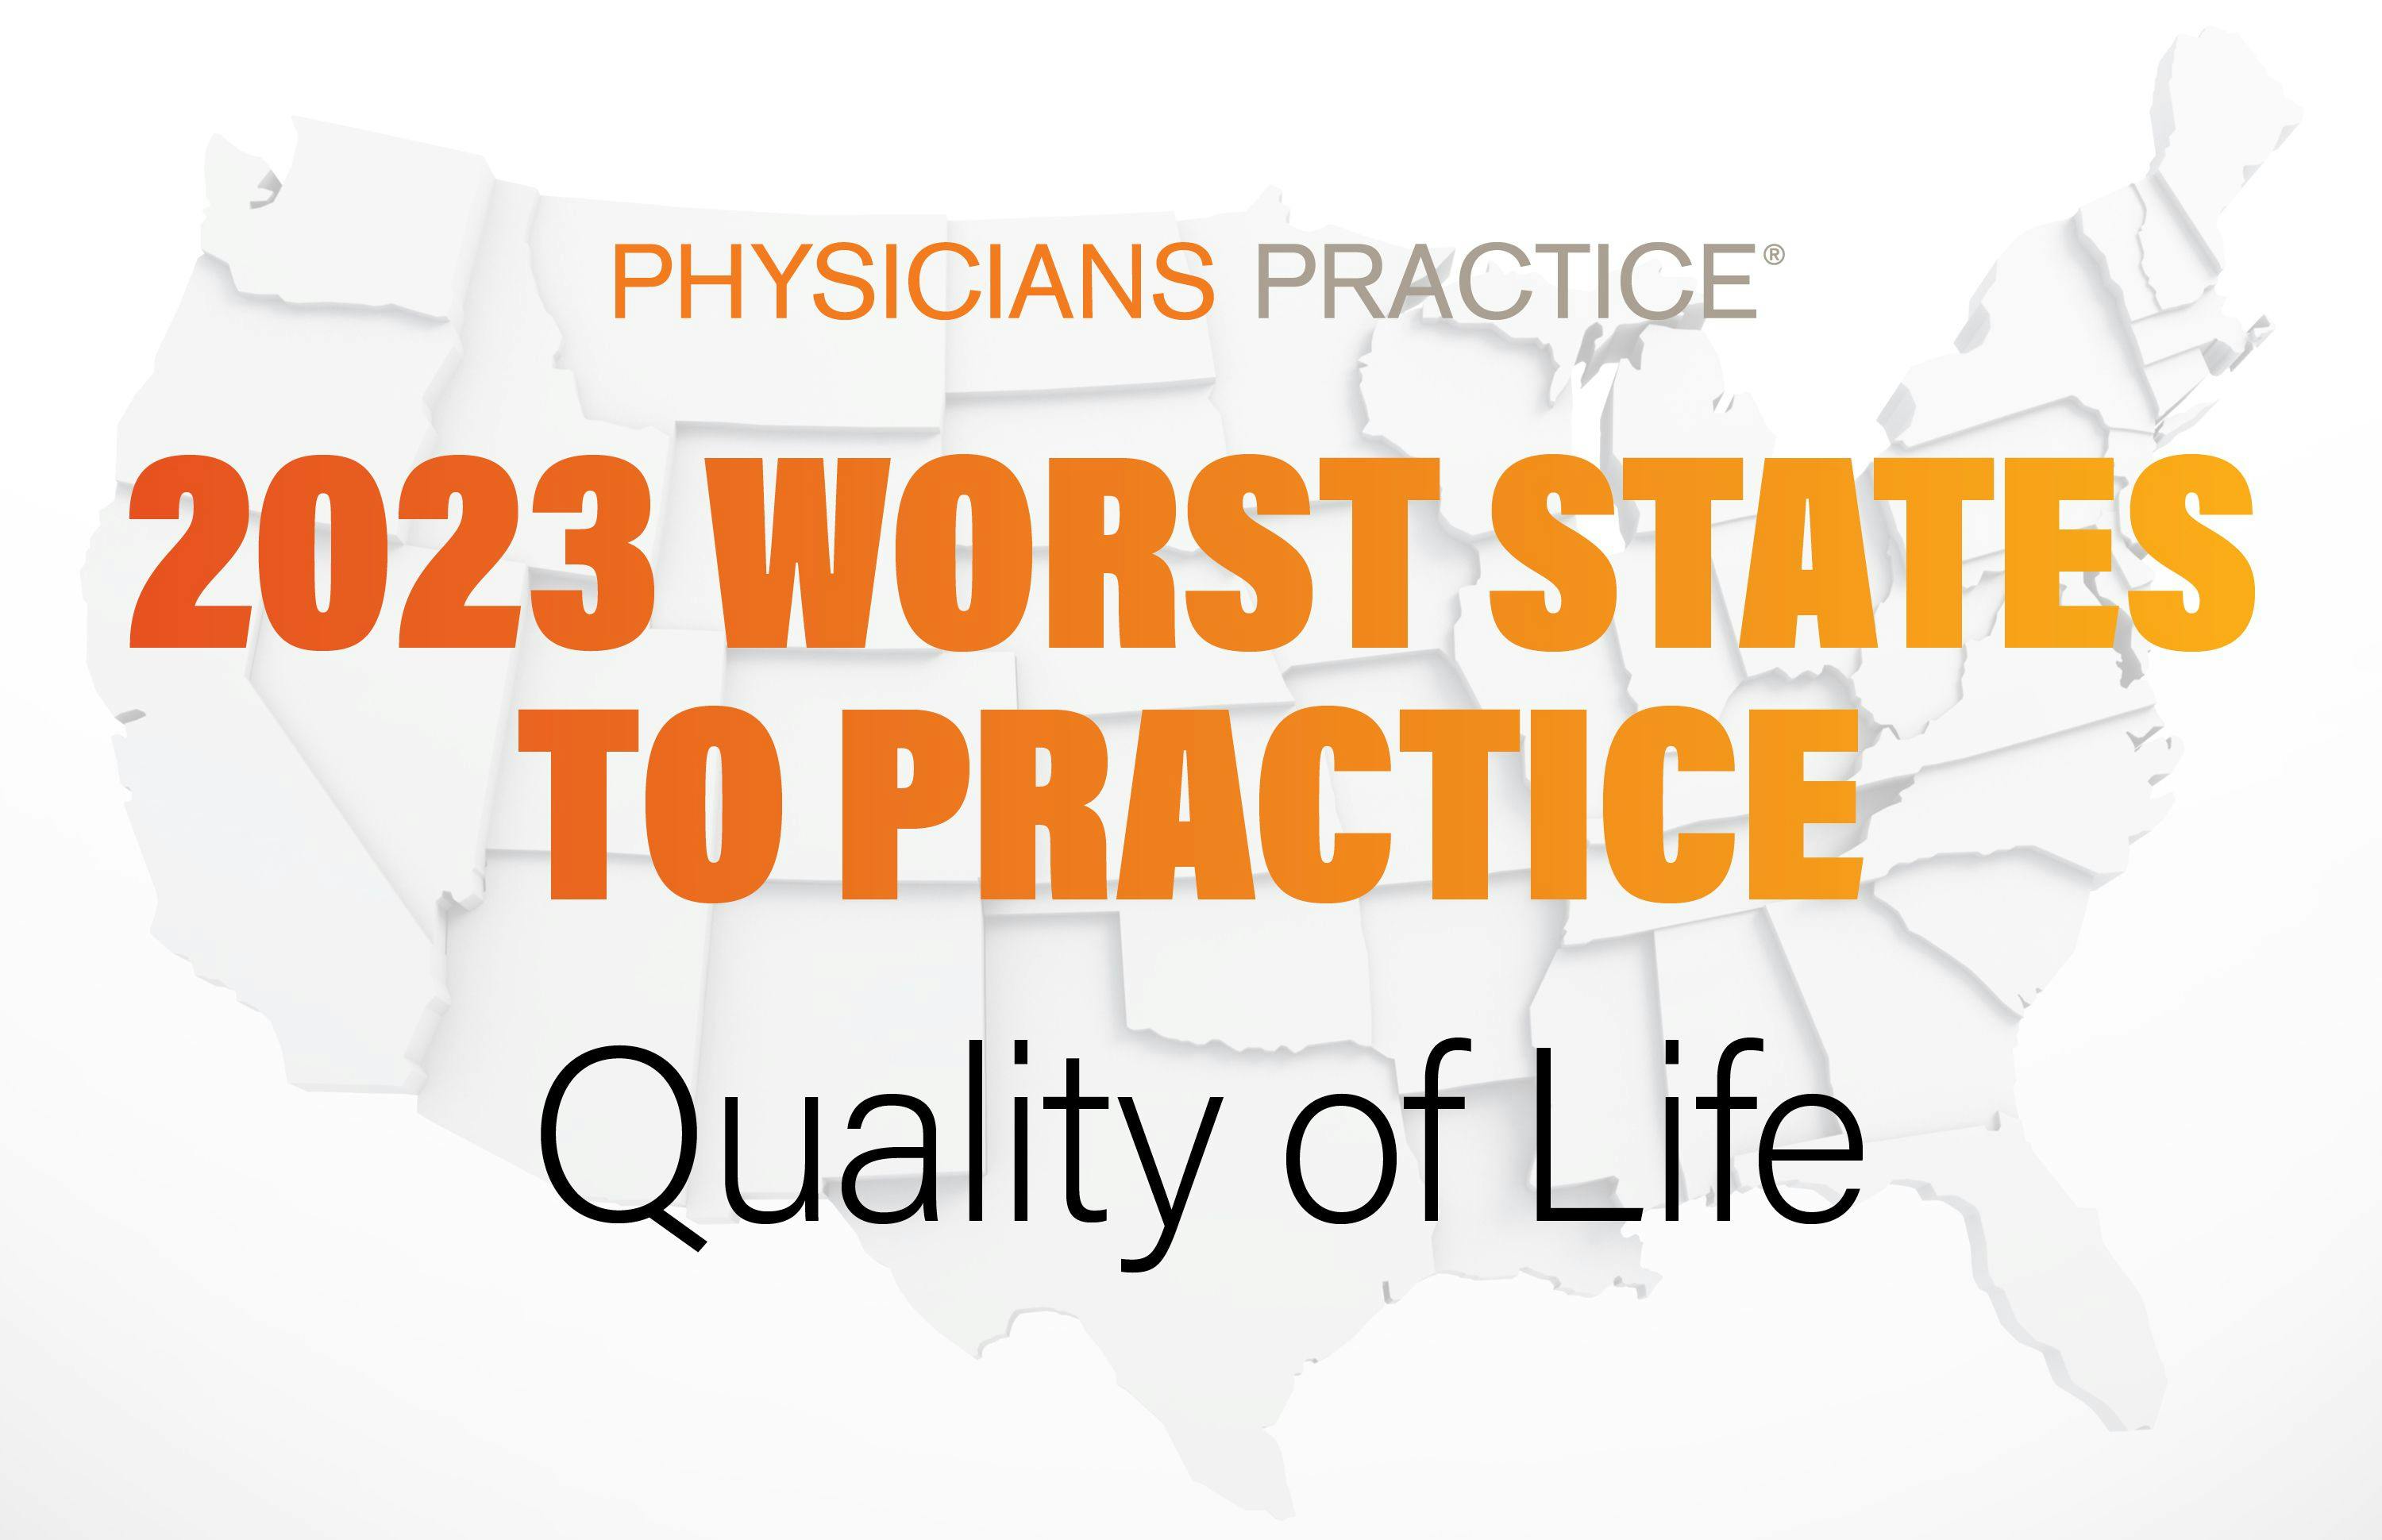 The 11 worst states to practice for quality of life